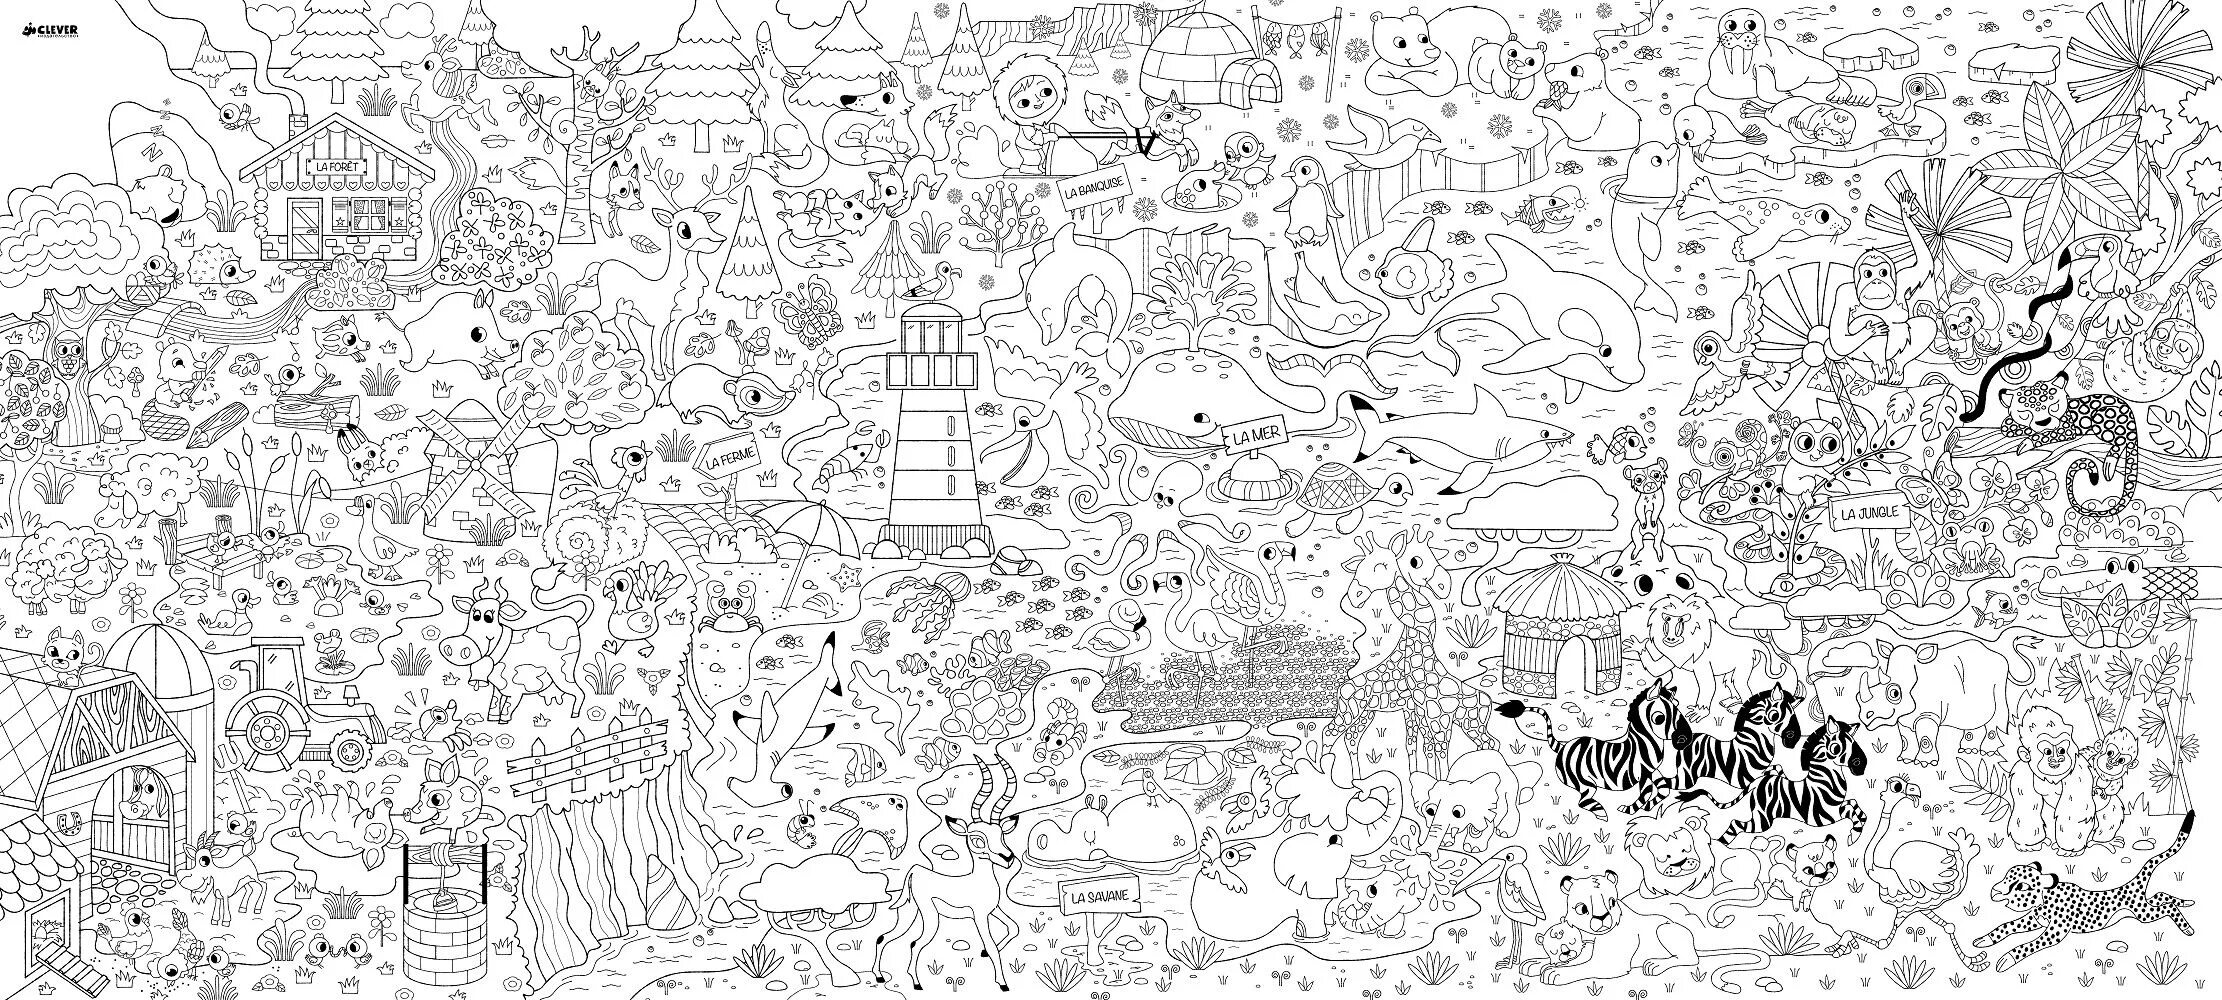 Creative coloring book with great details